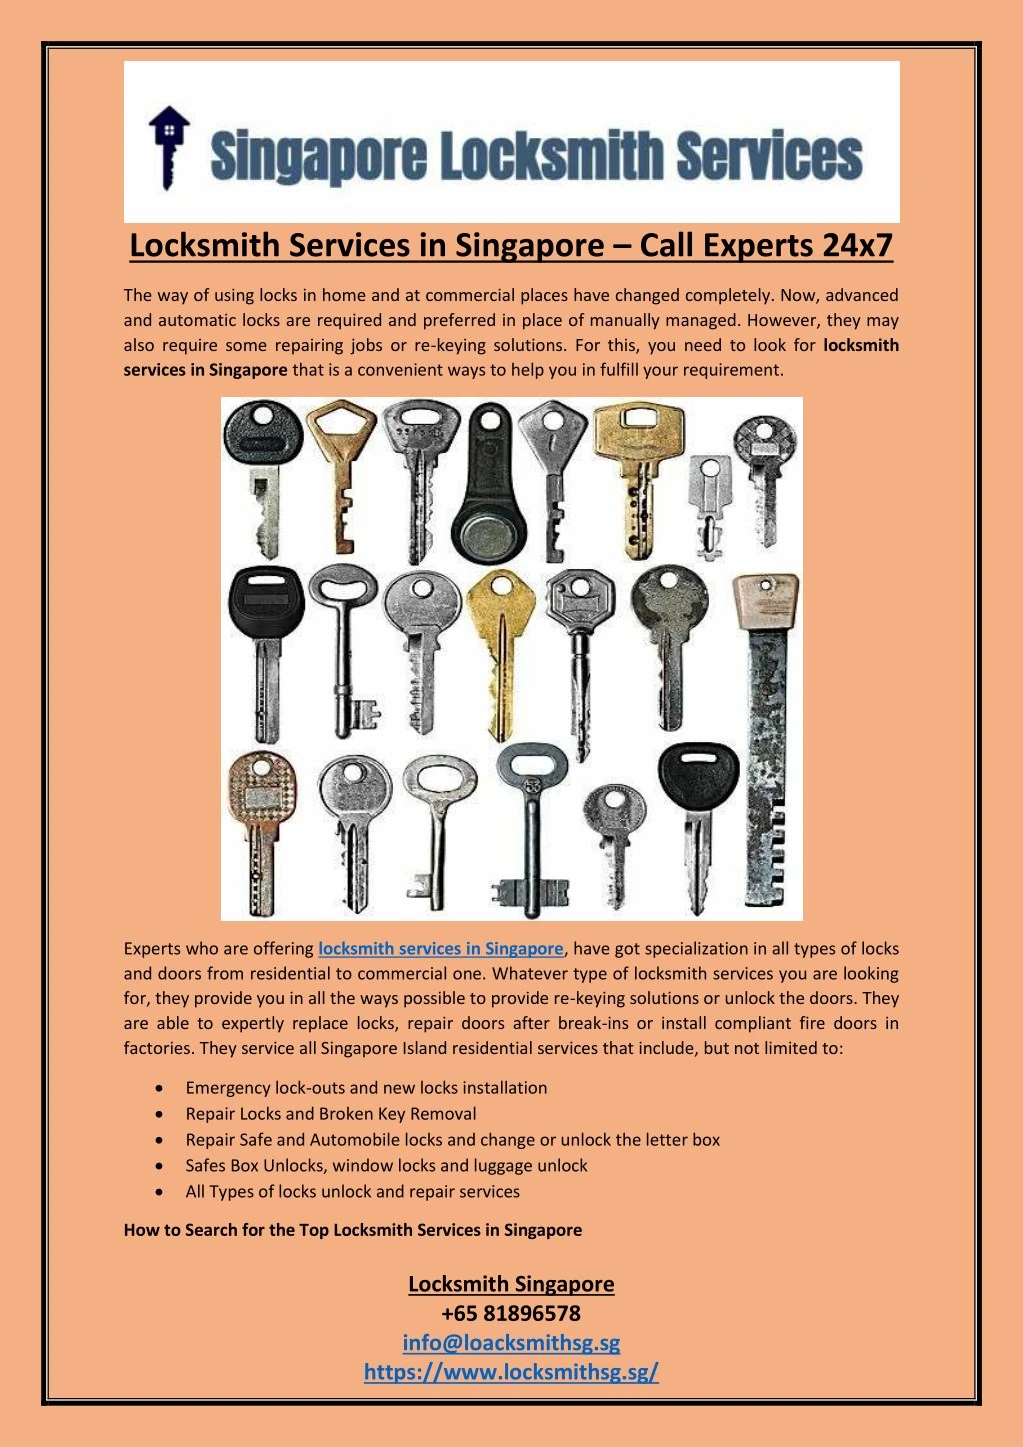 locksmith services in singapore call experts 24x7